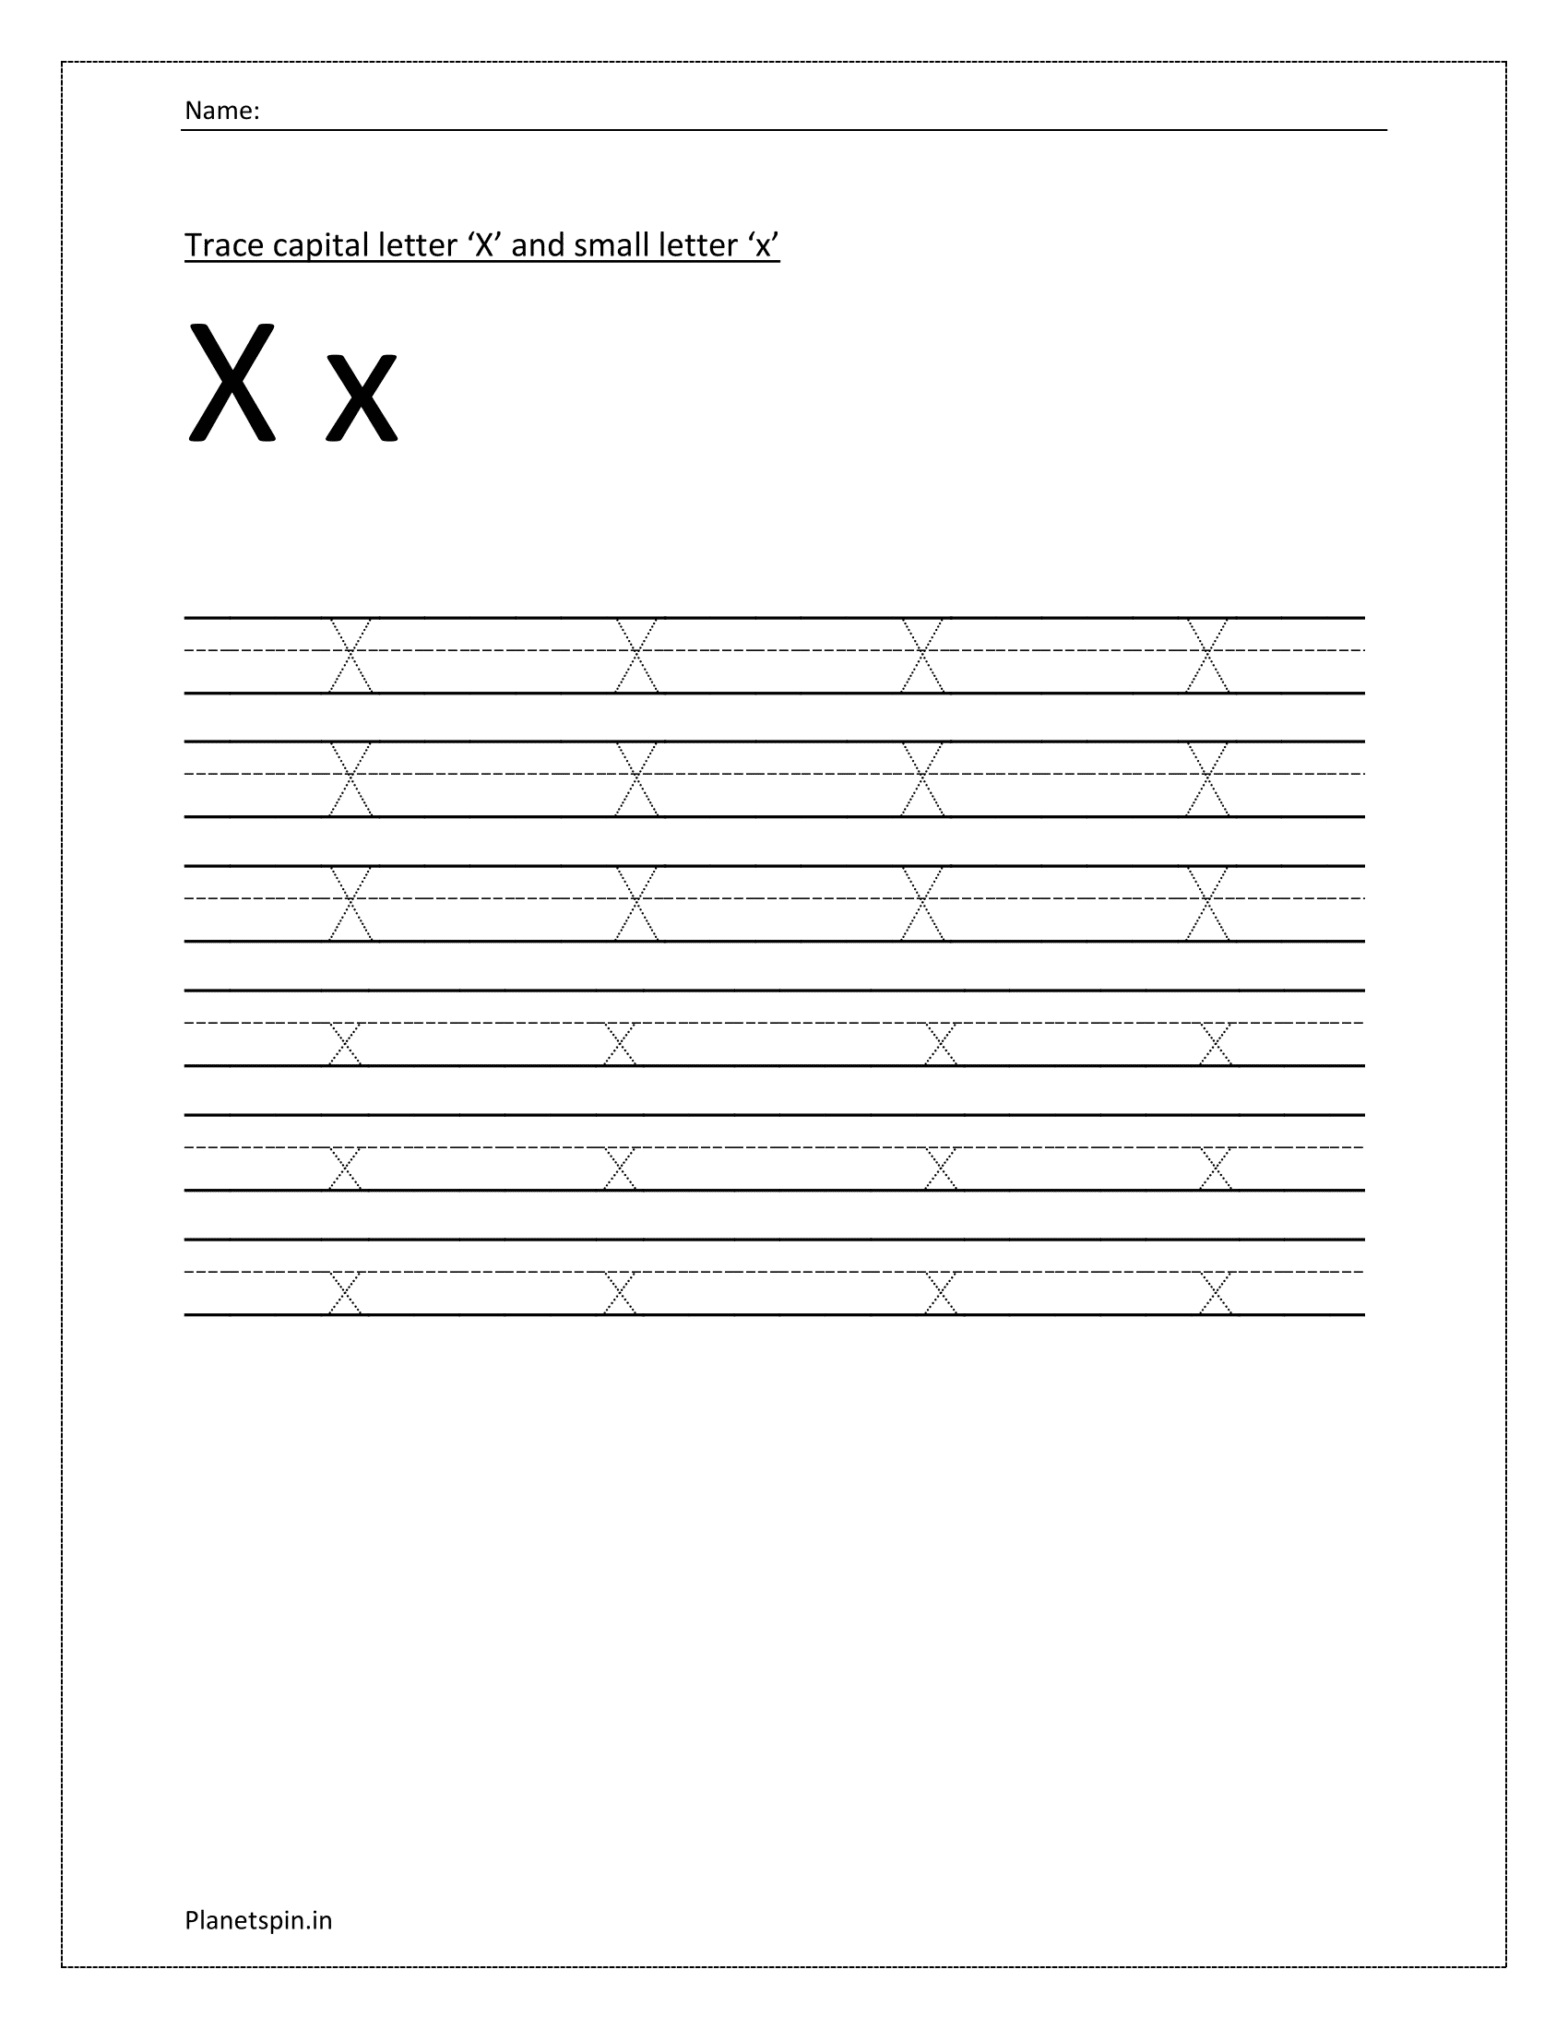 worksheet-letter-x-planetspin-in